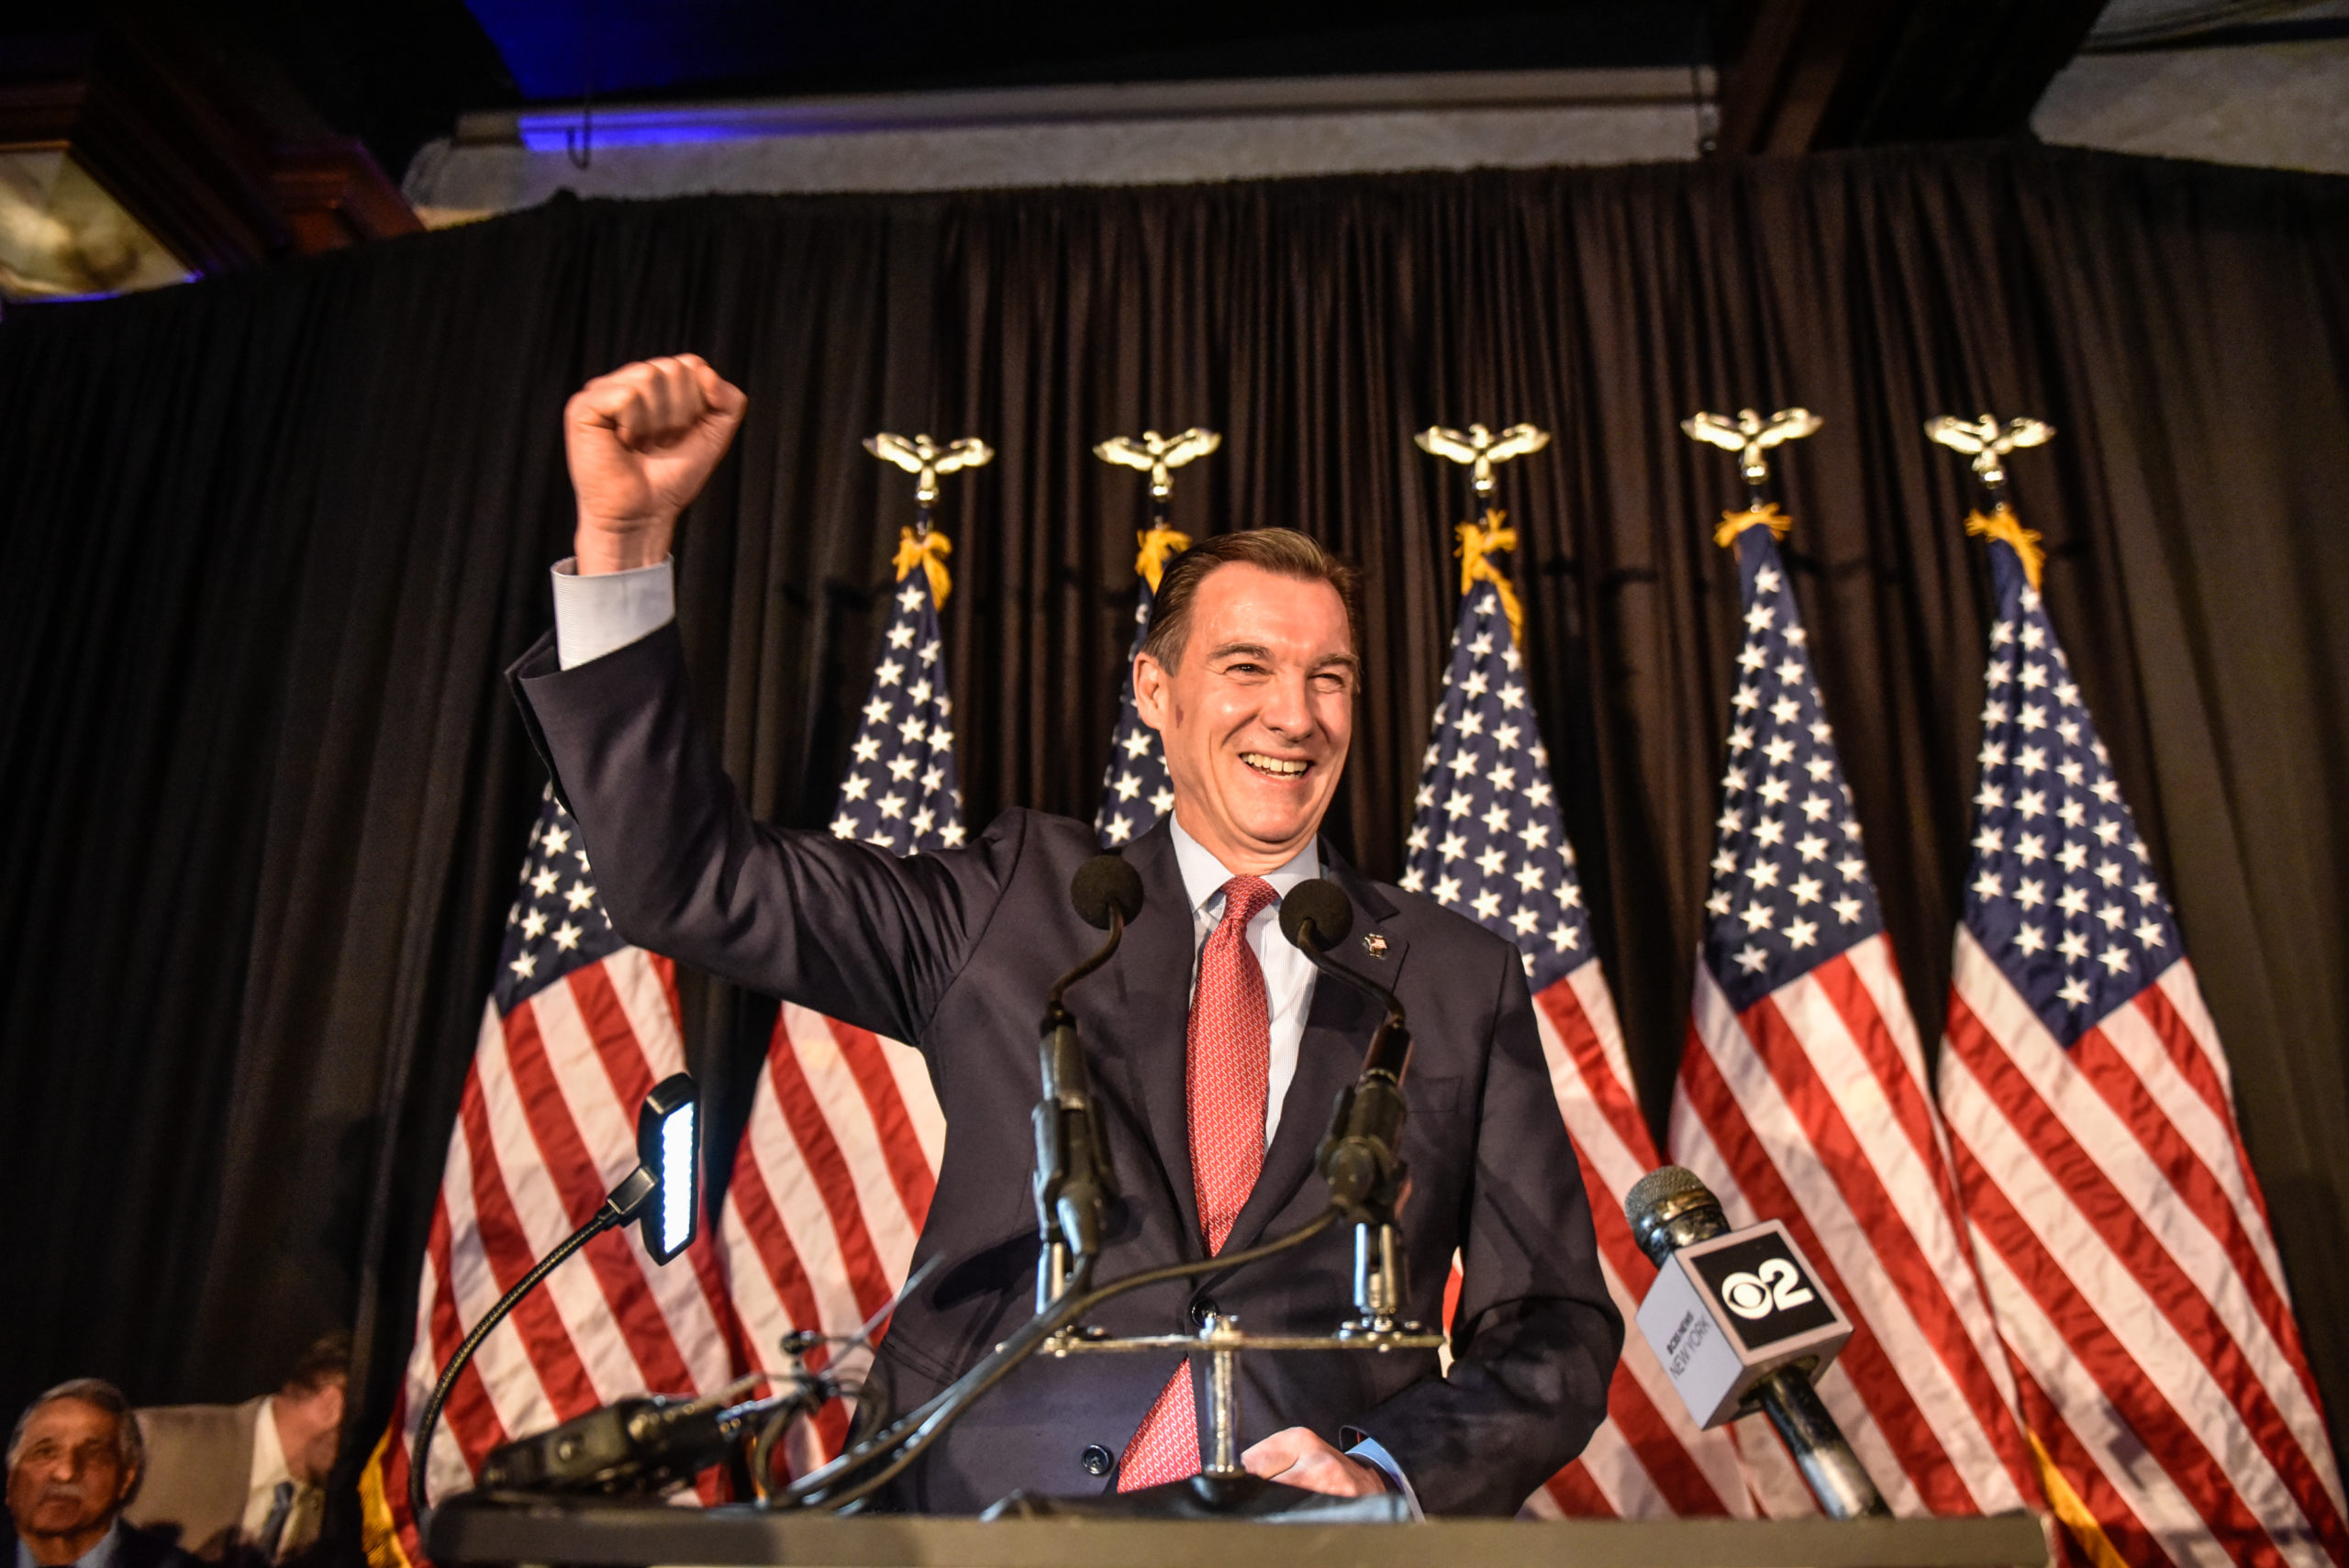 WOODBURY, NEW YORK - FEBRUARY 13: Democratic U.S. House candidate Tom Suozzi celebrates his victory in the special election to replace Republican Rep. George Santos on February 13, 2024 in Woodbury, New York. Suozzi defeated Republican Mazi Pilip in a race closely watched nationally as the presidential race heats up. (Photo by Stephanie Keith/Getty Images)